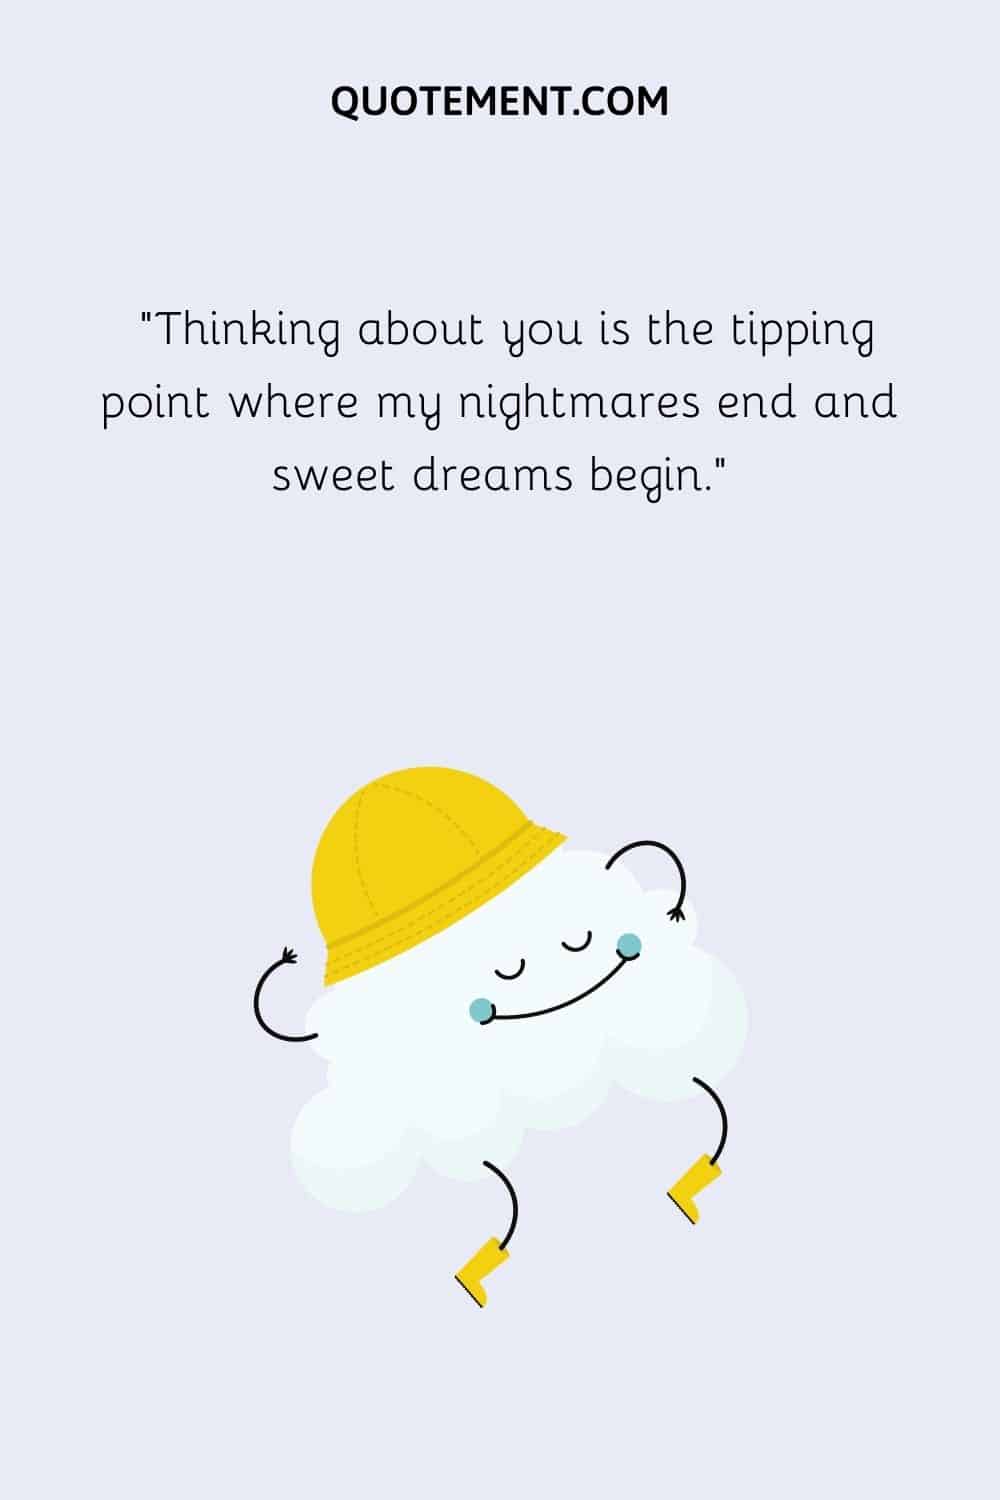 Thinking about you is the tipping point